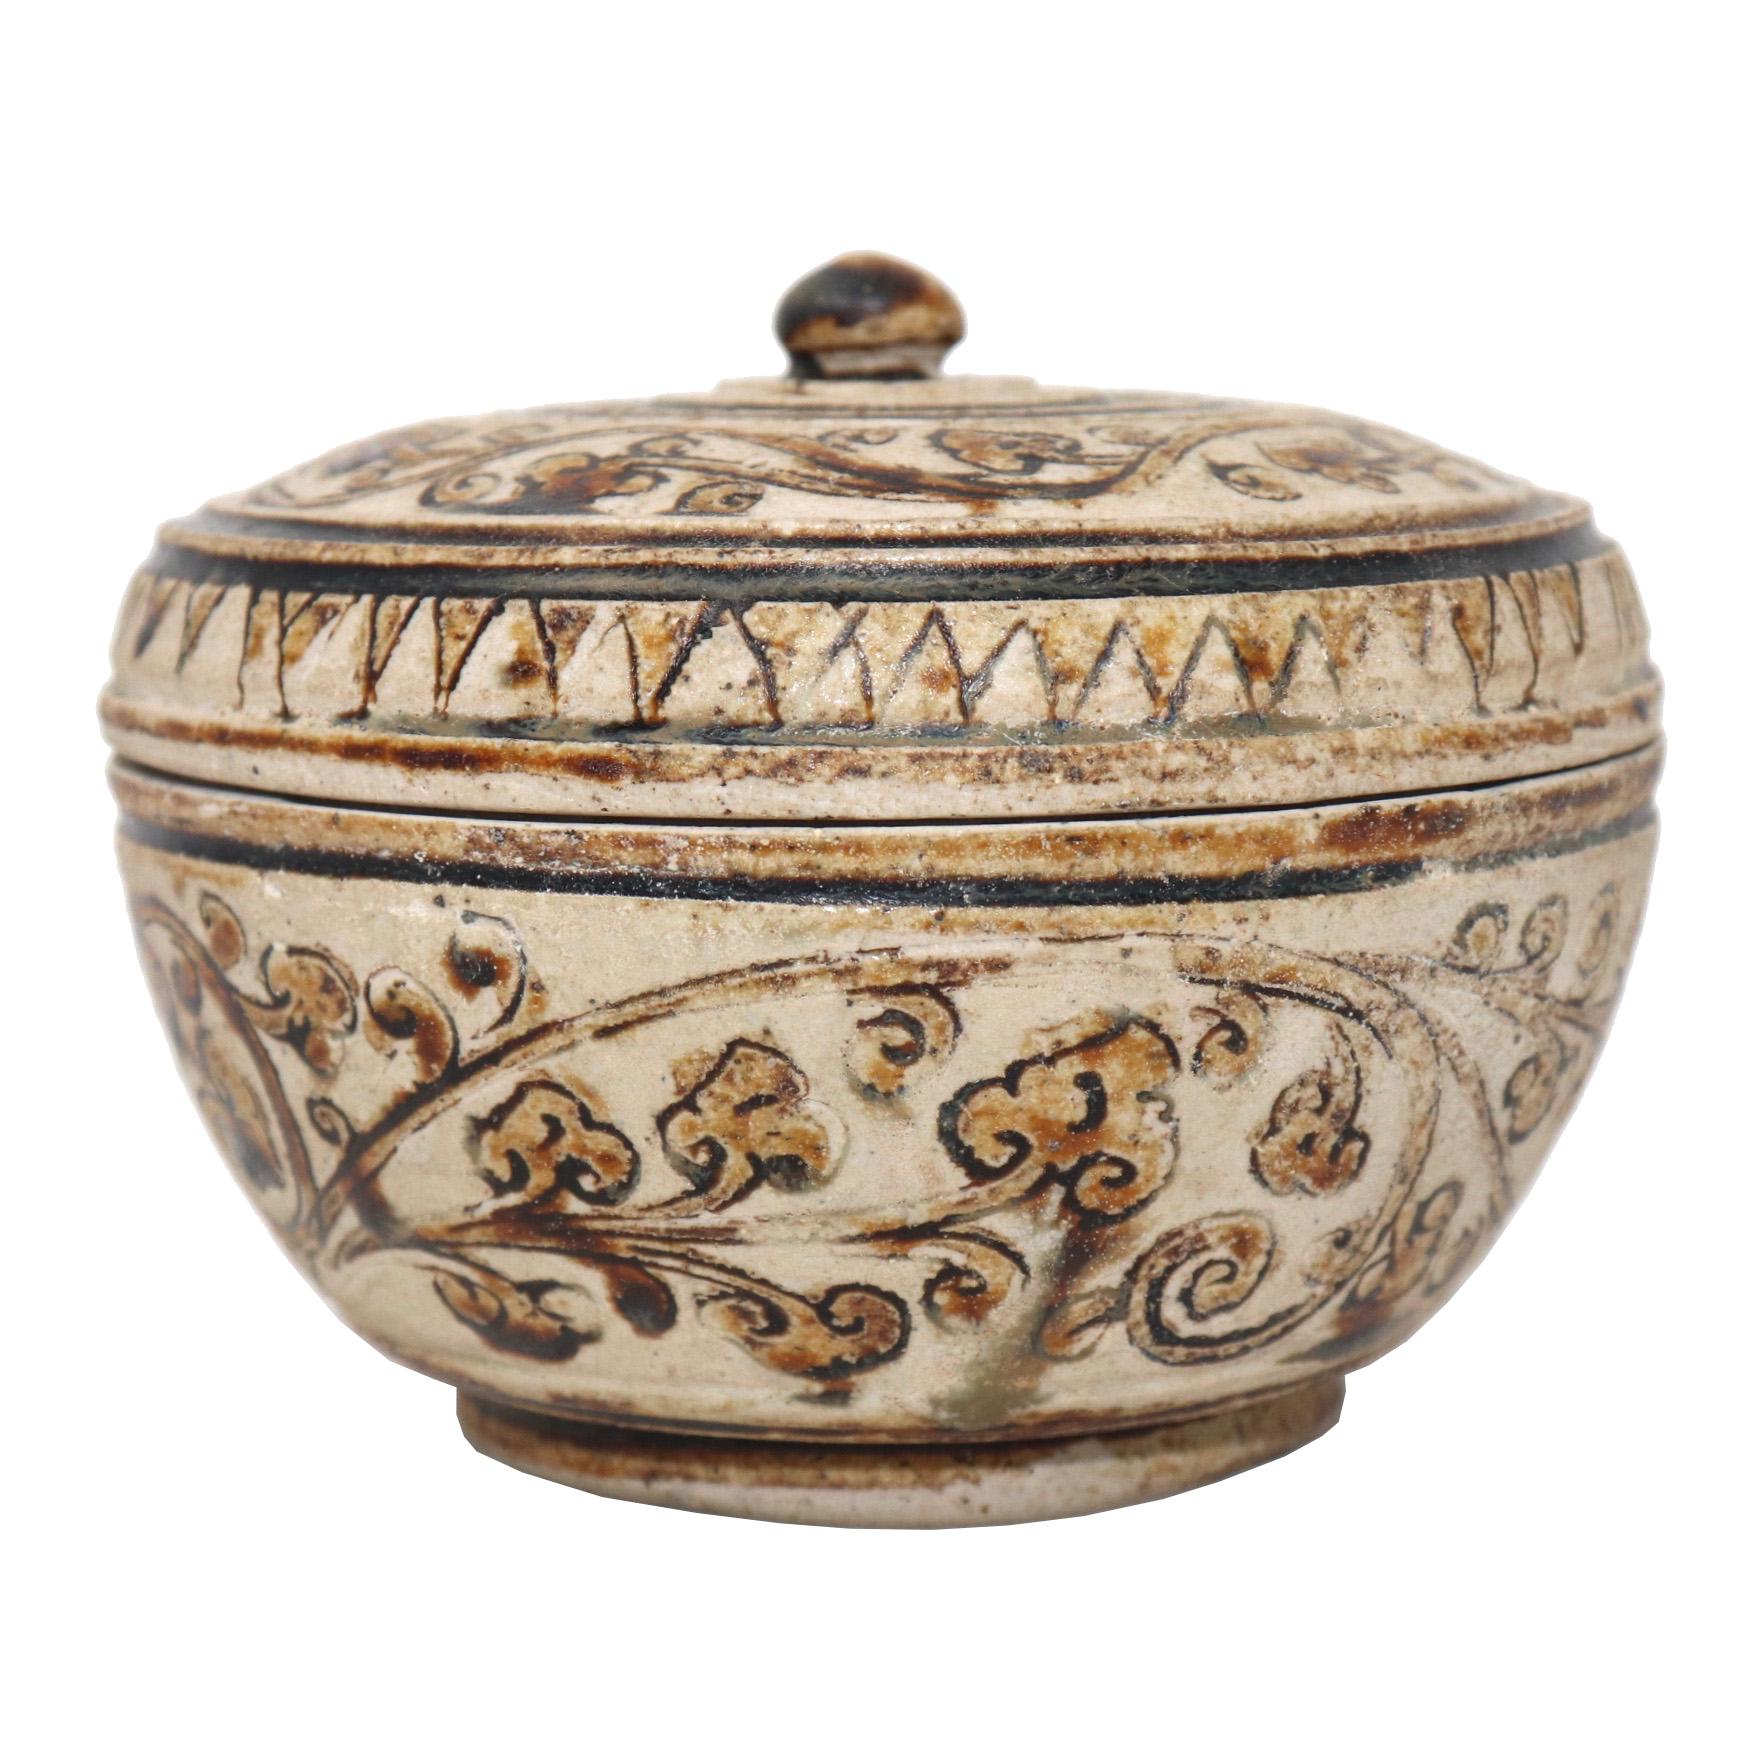 18th Century and Earlier Antique Brown and White Ceramic Box from the Sawankhalok Kilns, Thailand